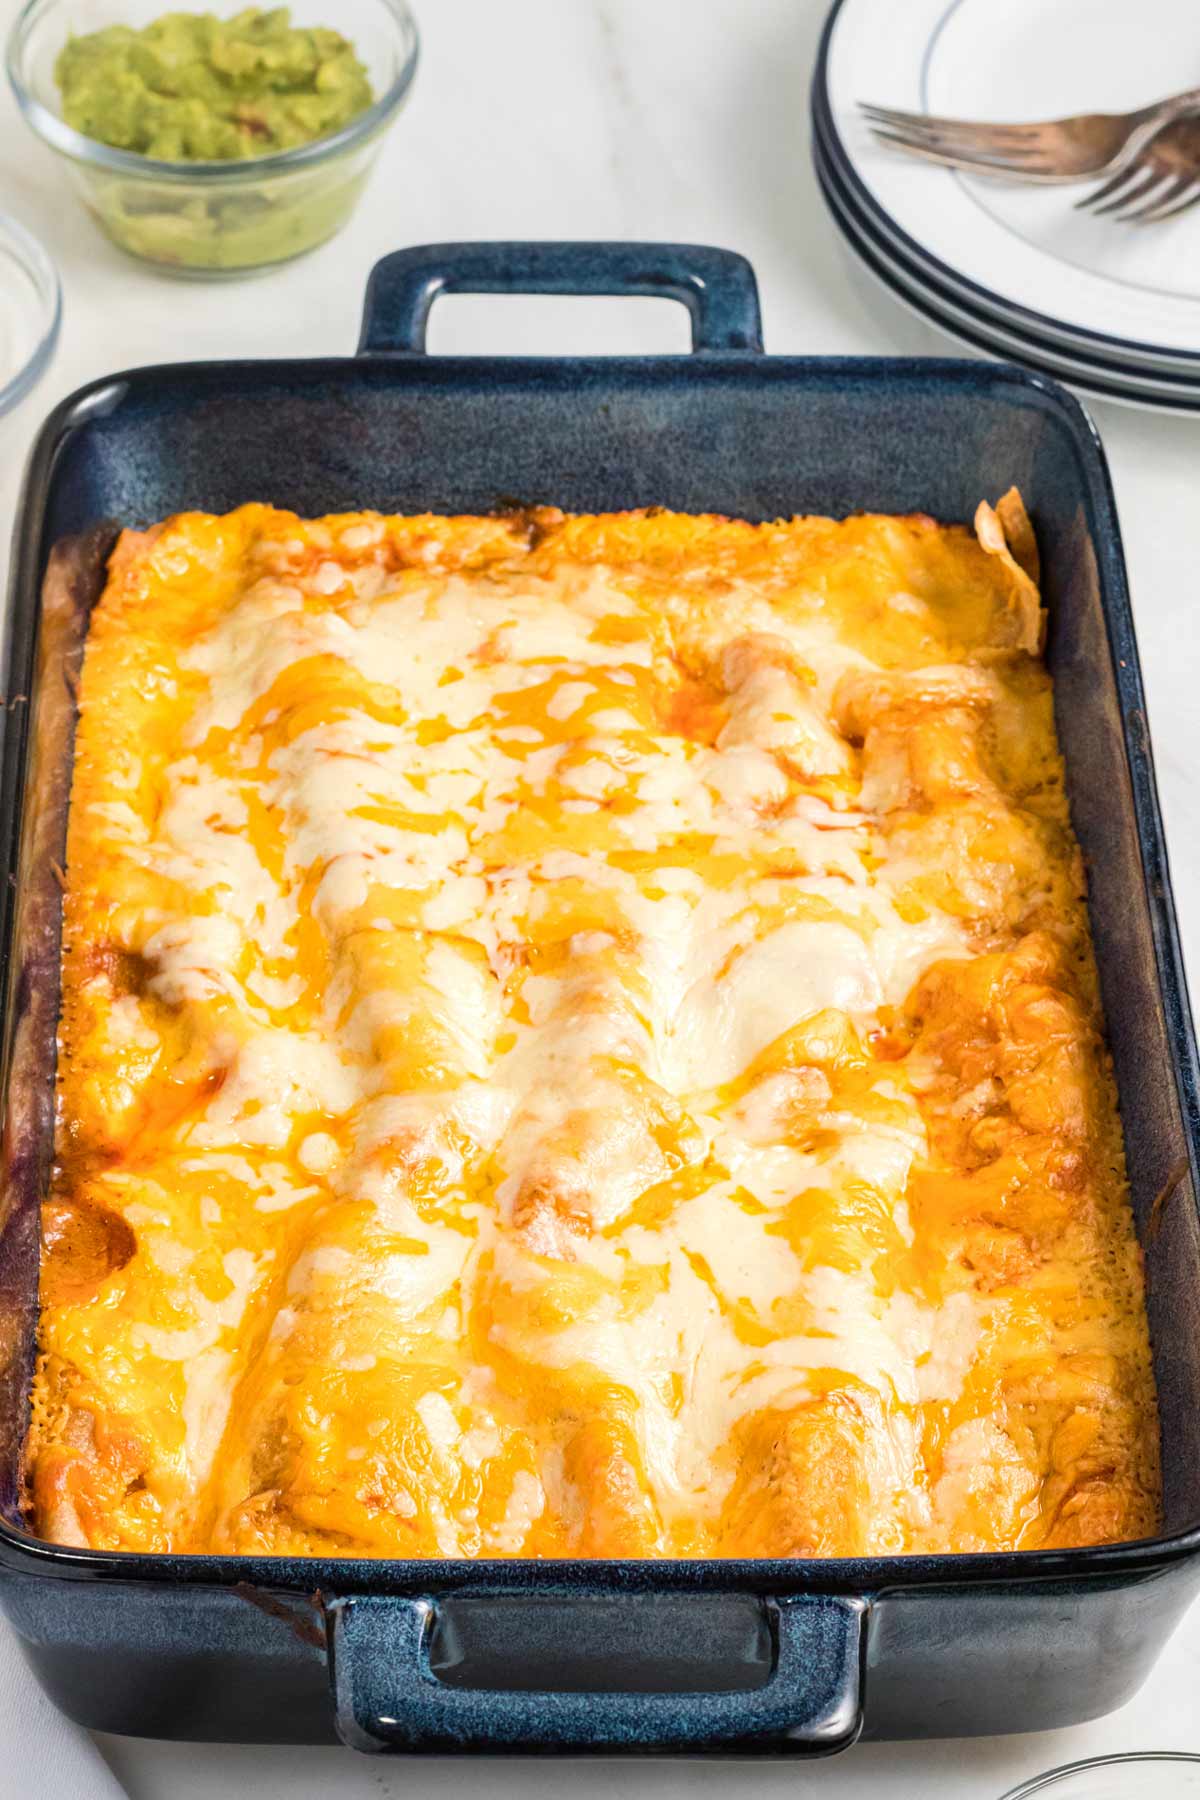 close-up shot of the enchiladas in a baking pan.